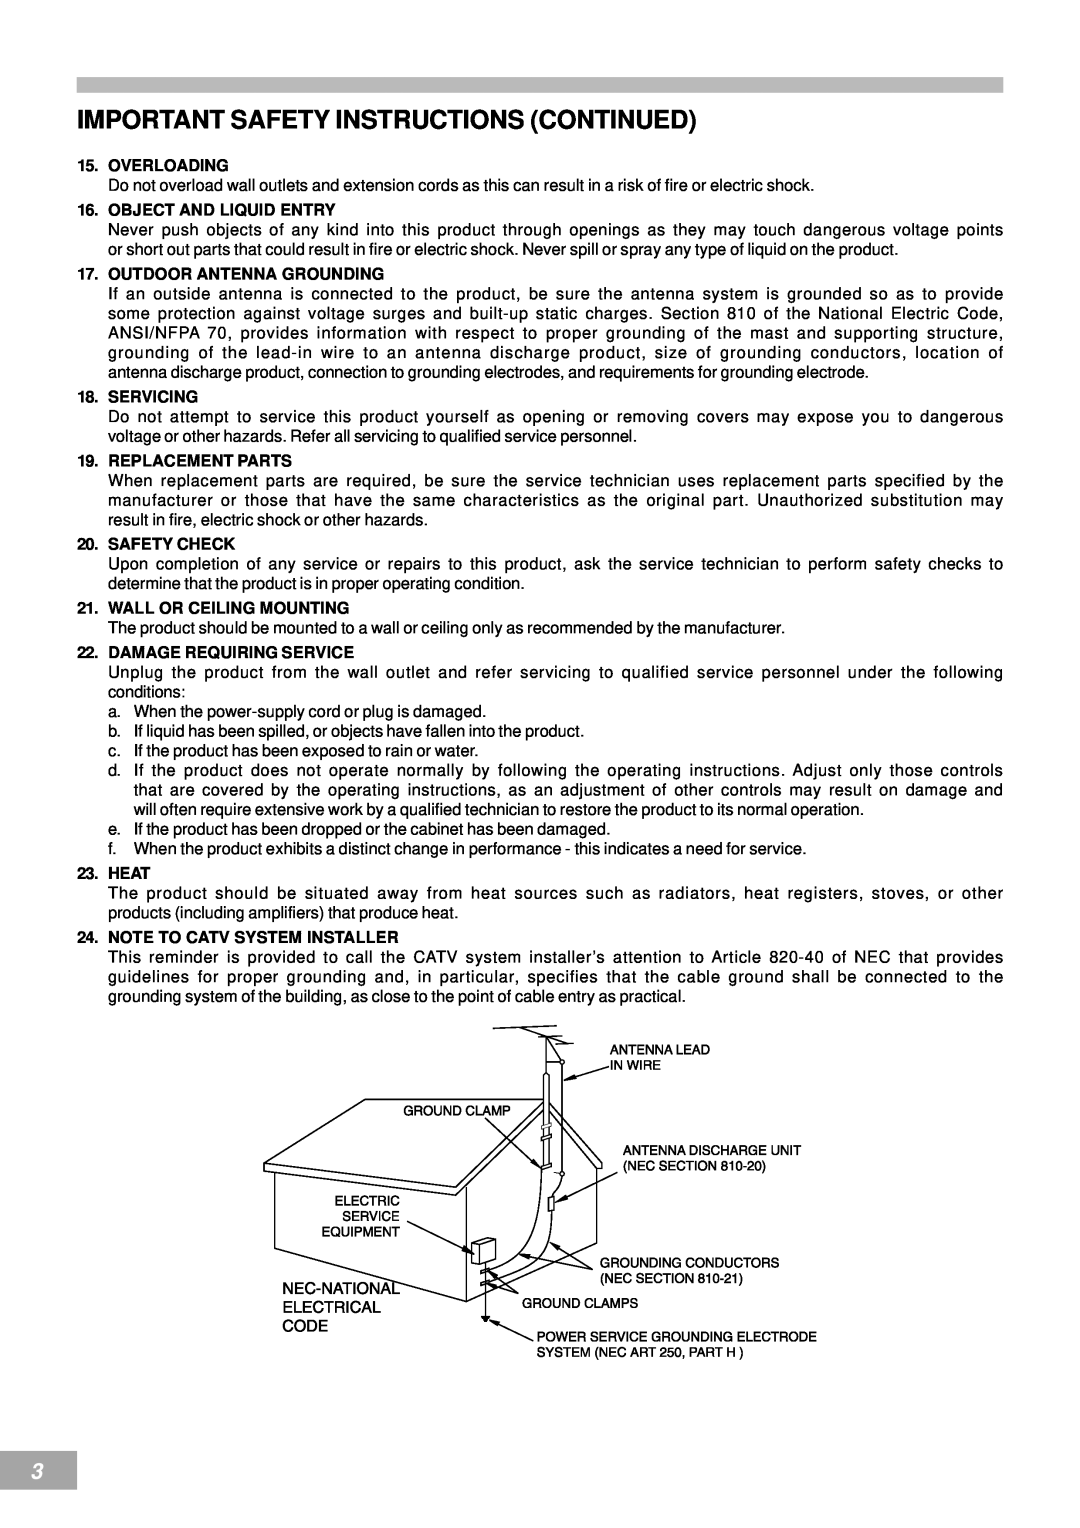 Emerson AV50 owner manual Important Safety Instructions Continued, Overloading 